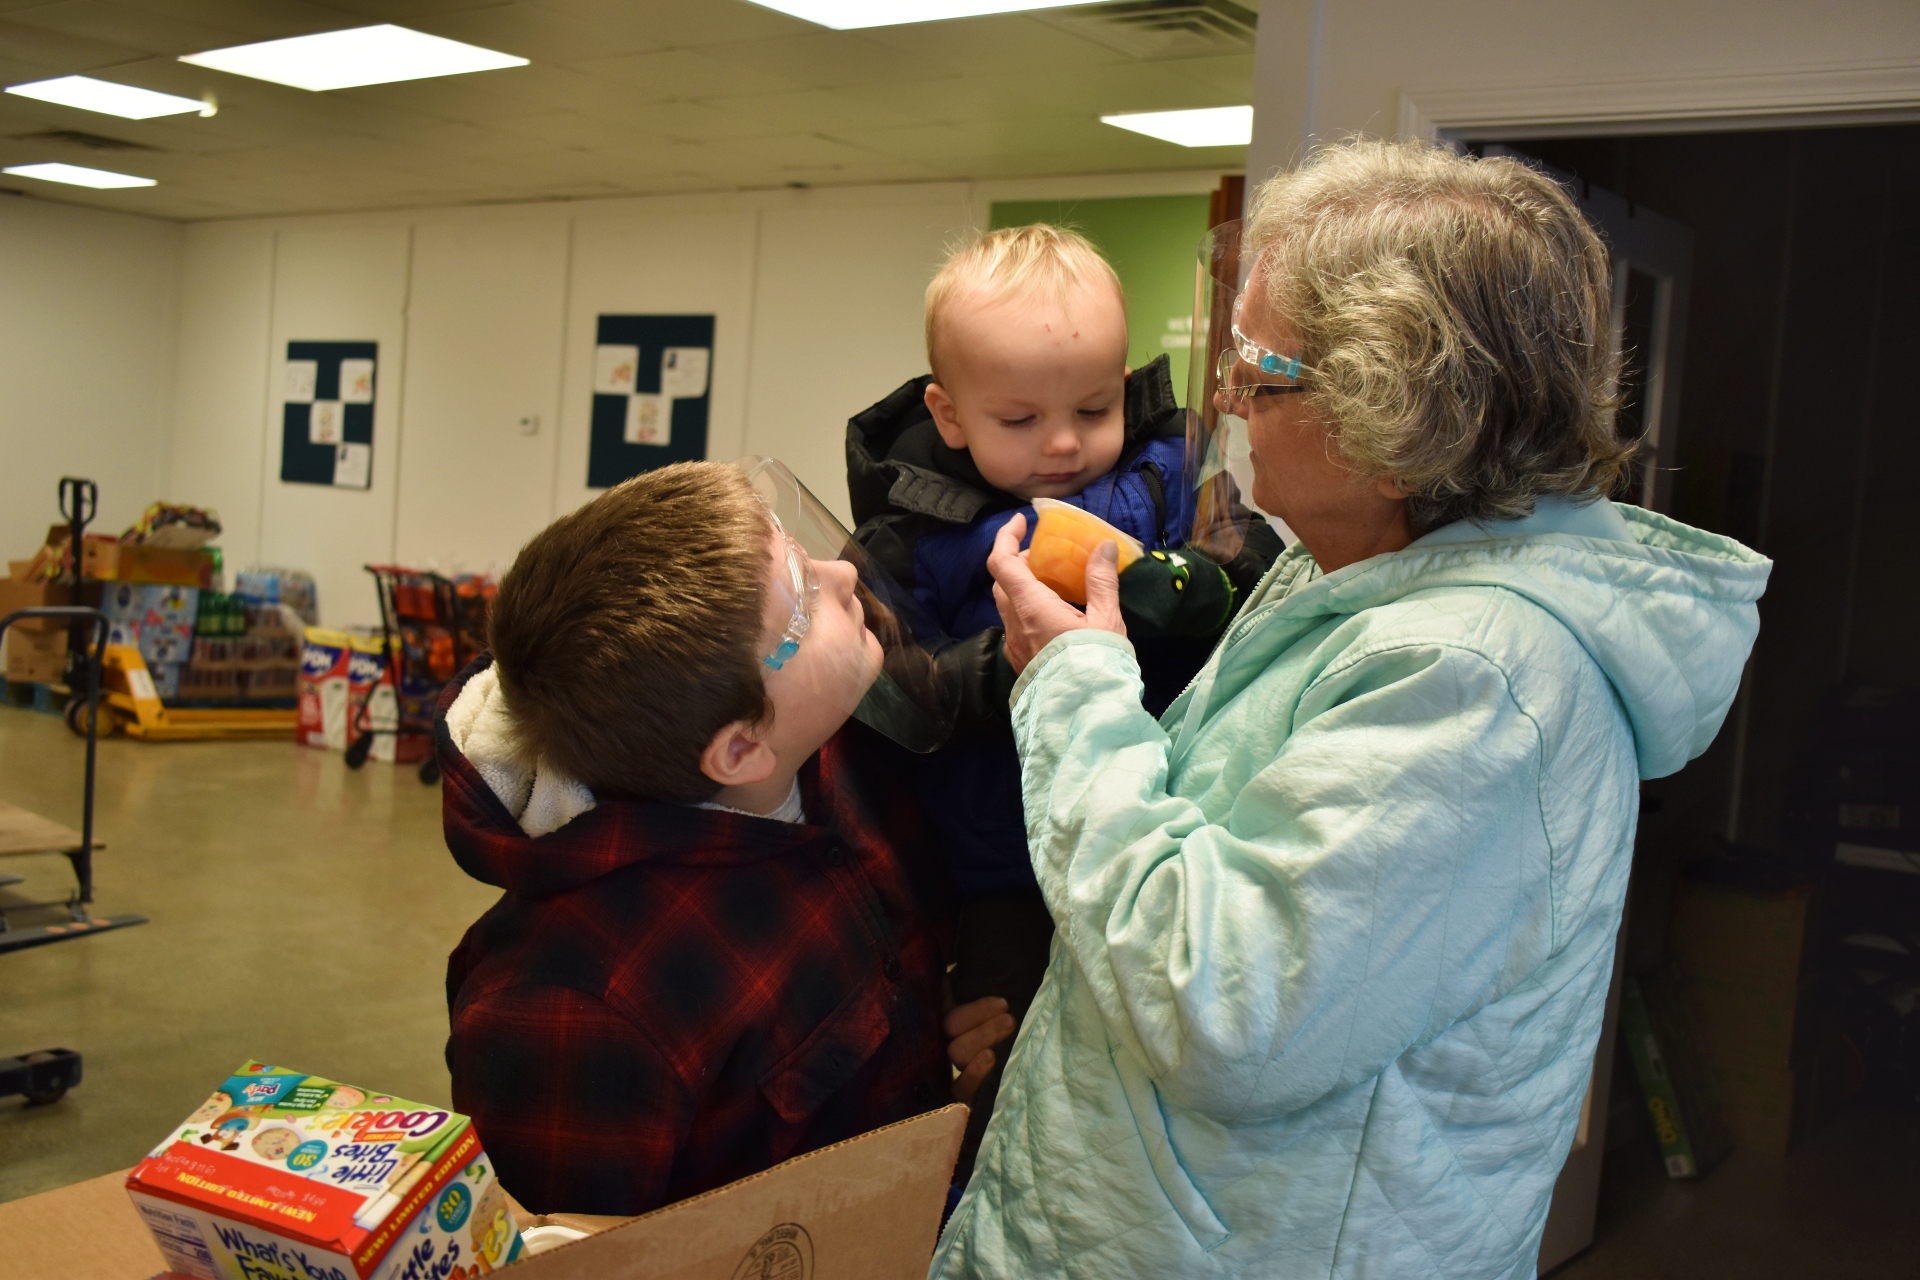 A grandma and her two grandkids look at food they've received